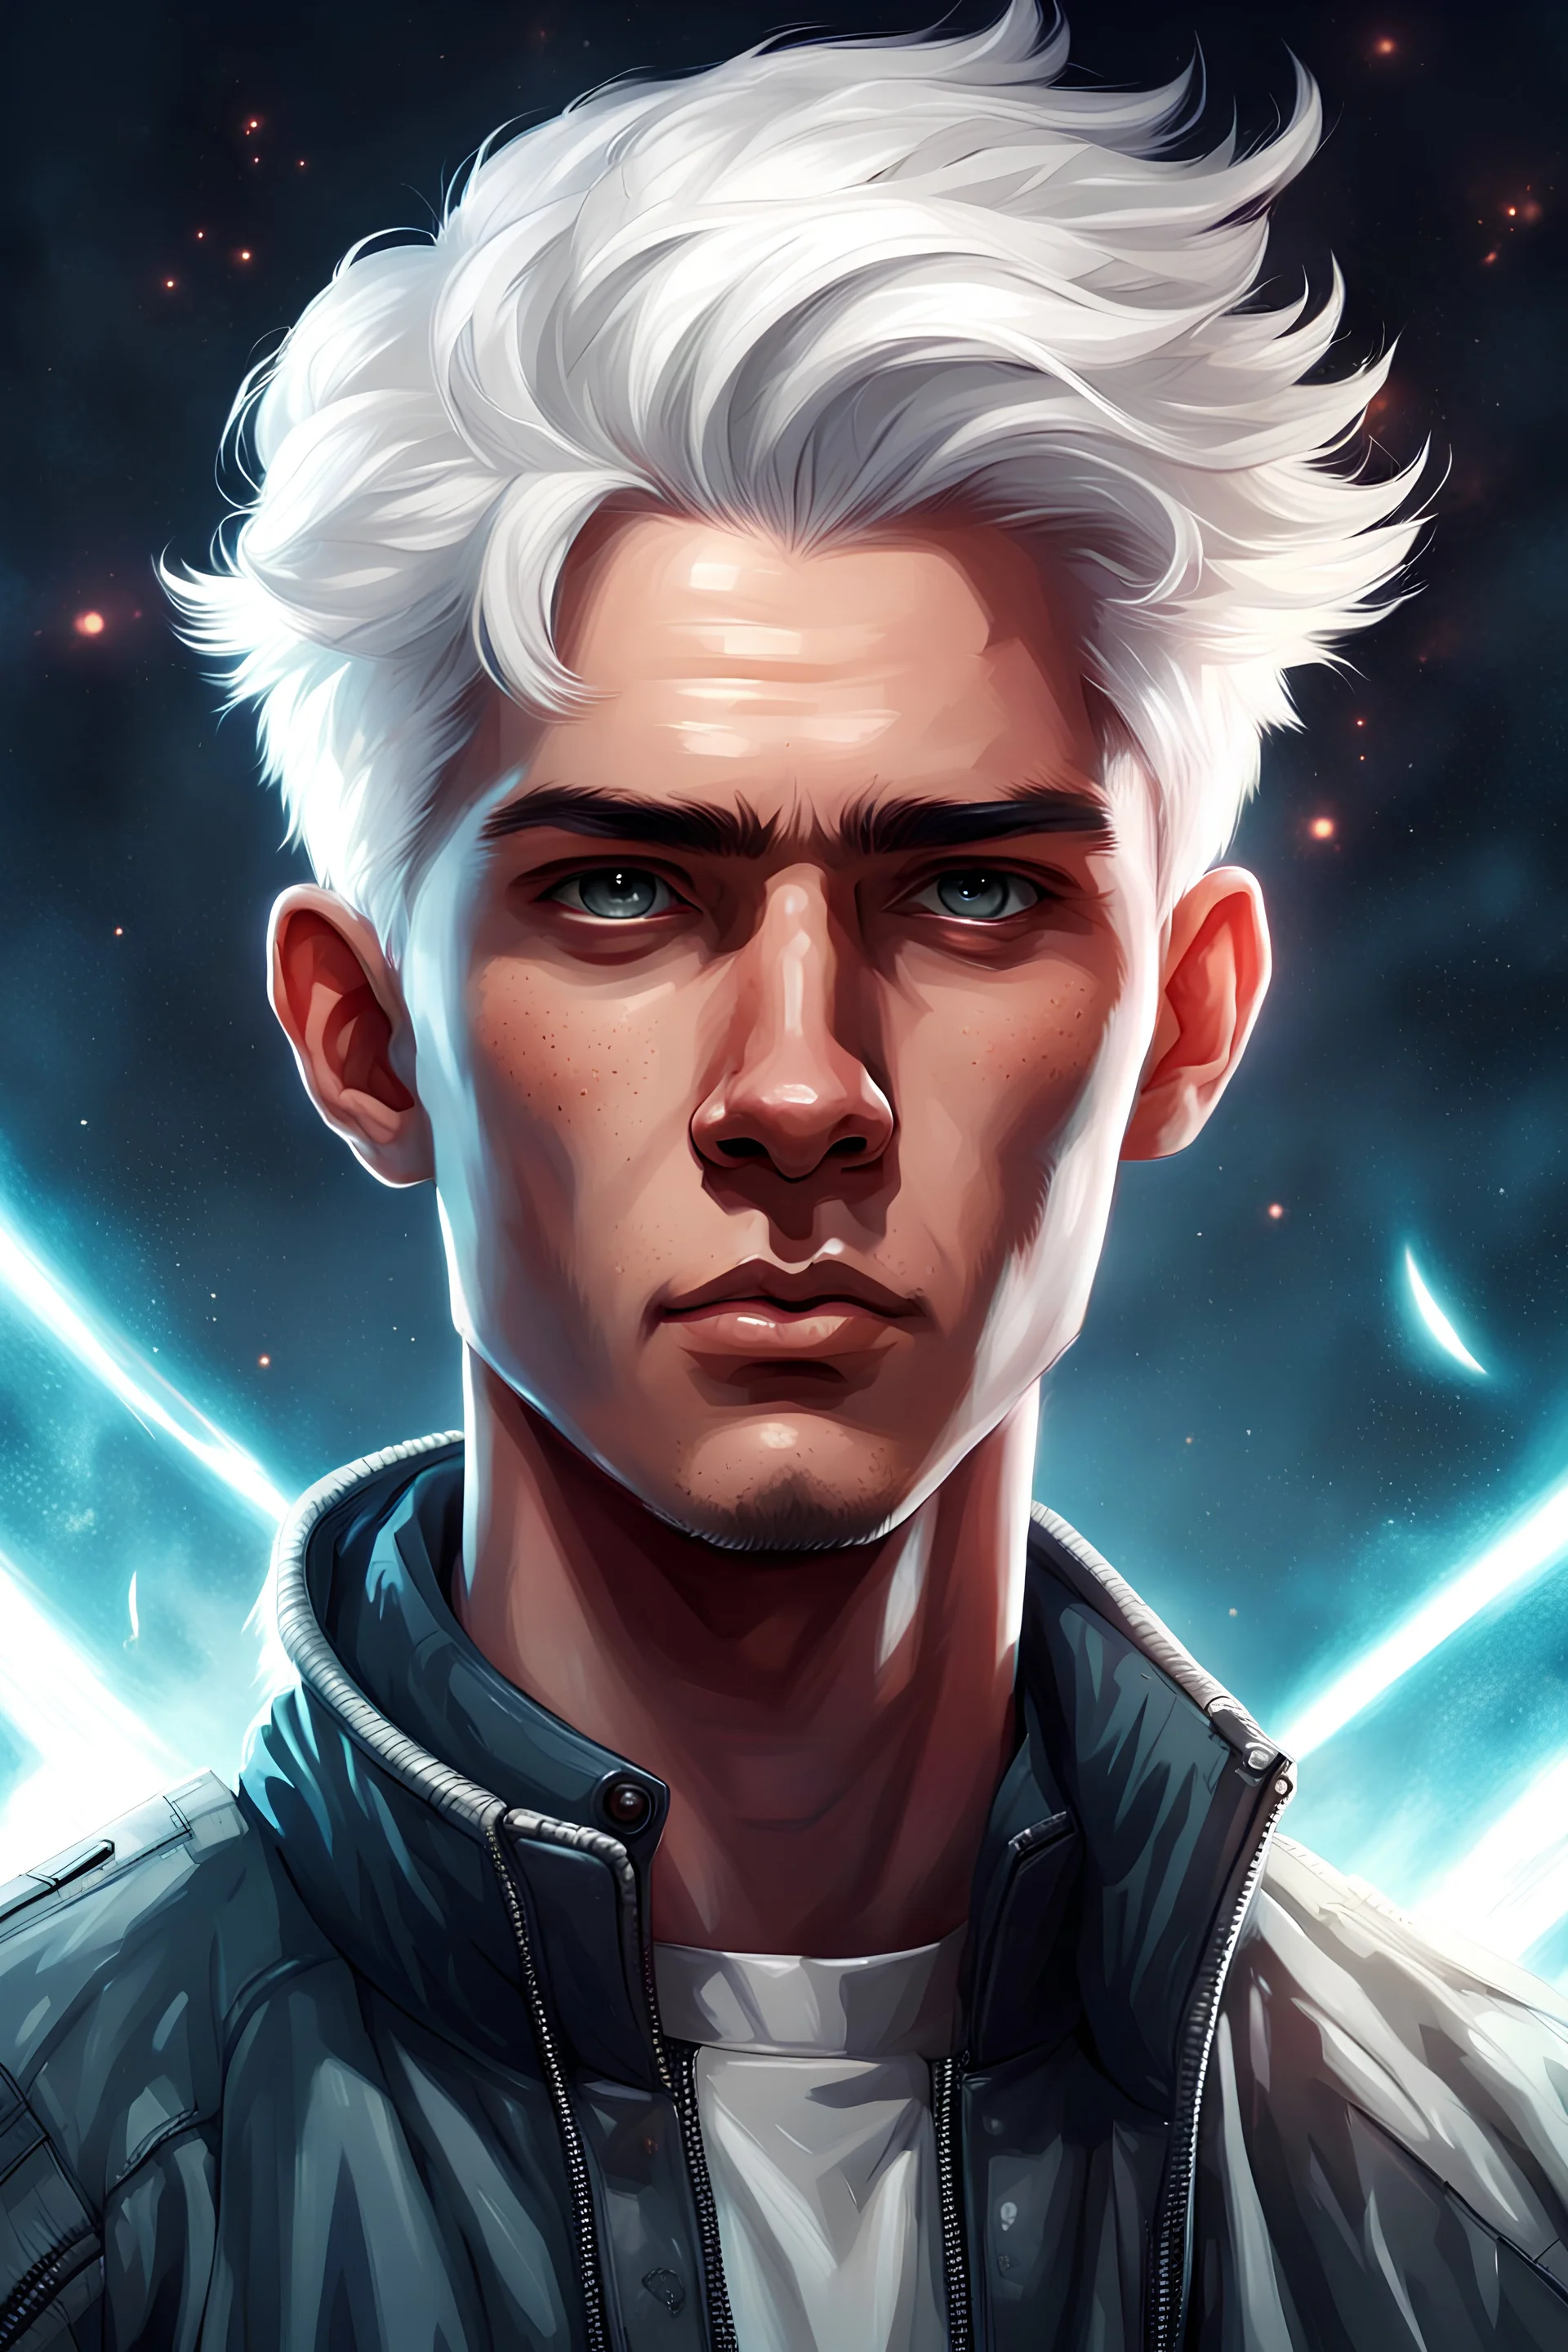 High Quality Science Fiction Character Portrait of a Young Man with White Hair in a Bomber Jacket.